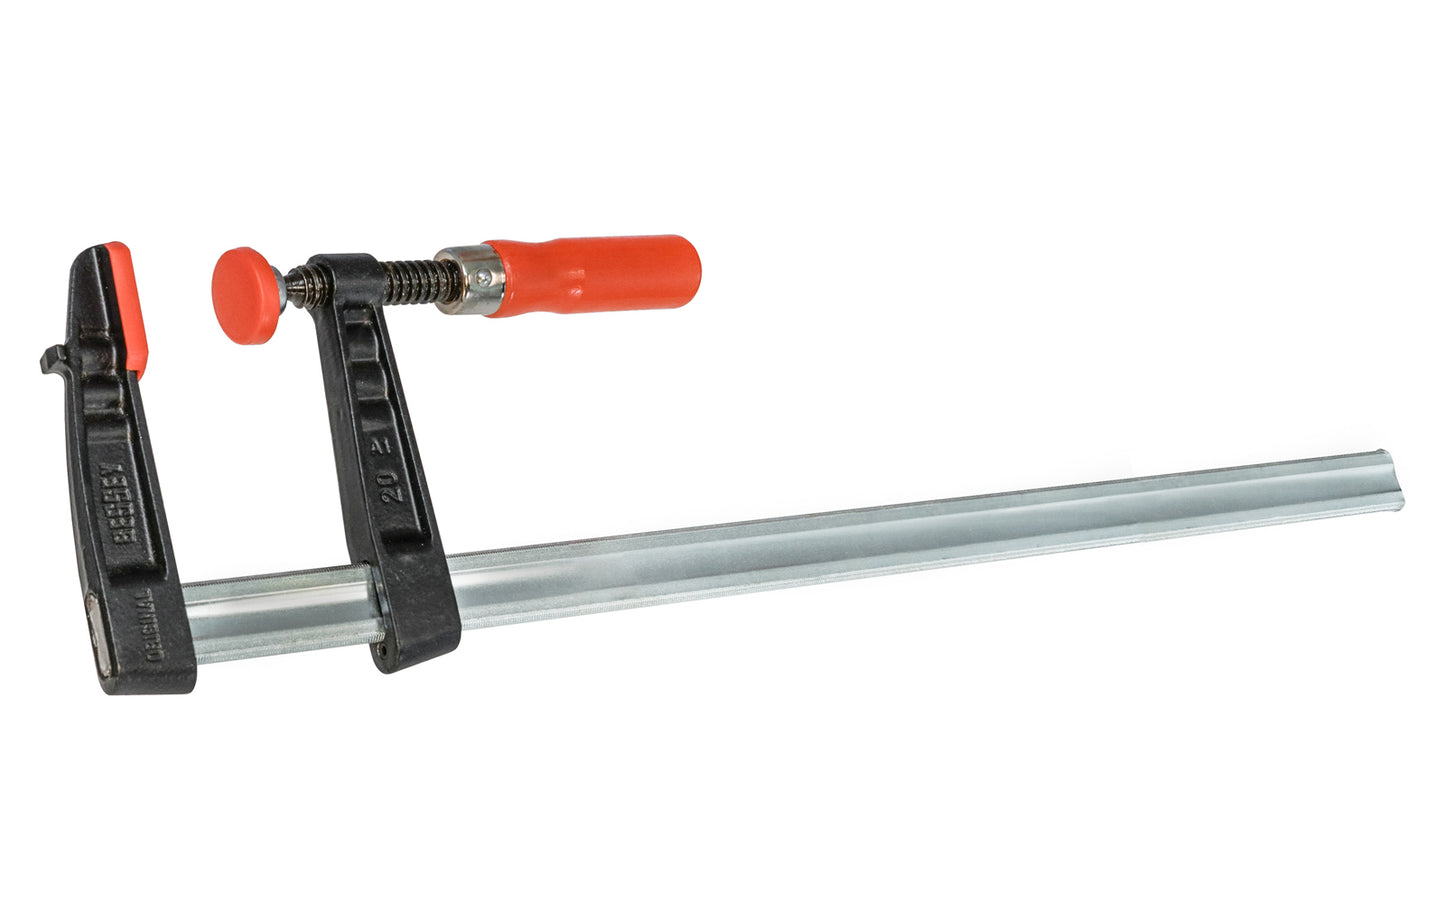 This Bessey 24" Medium-Duty Steel Bar Clamp head is made of malleable cast iron. Fixed jaw & sliding arm generates powerful & rigid clamping. Wooden handles - 1000 lb. clamping pressure - Model TG4.524 - "TG series" Bessey Clamps 24" max opening - 4-1/2" throat depth - Made in Germany - 091162007570. Medium Duty Clamp